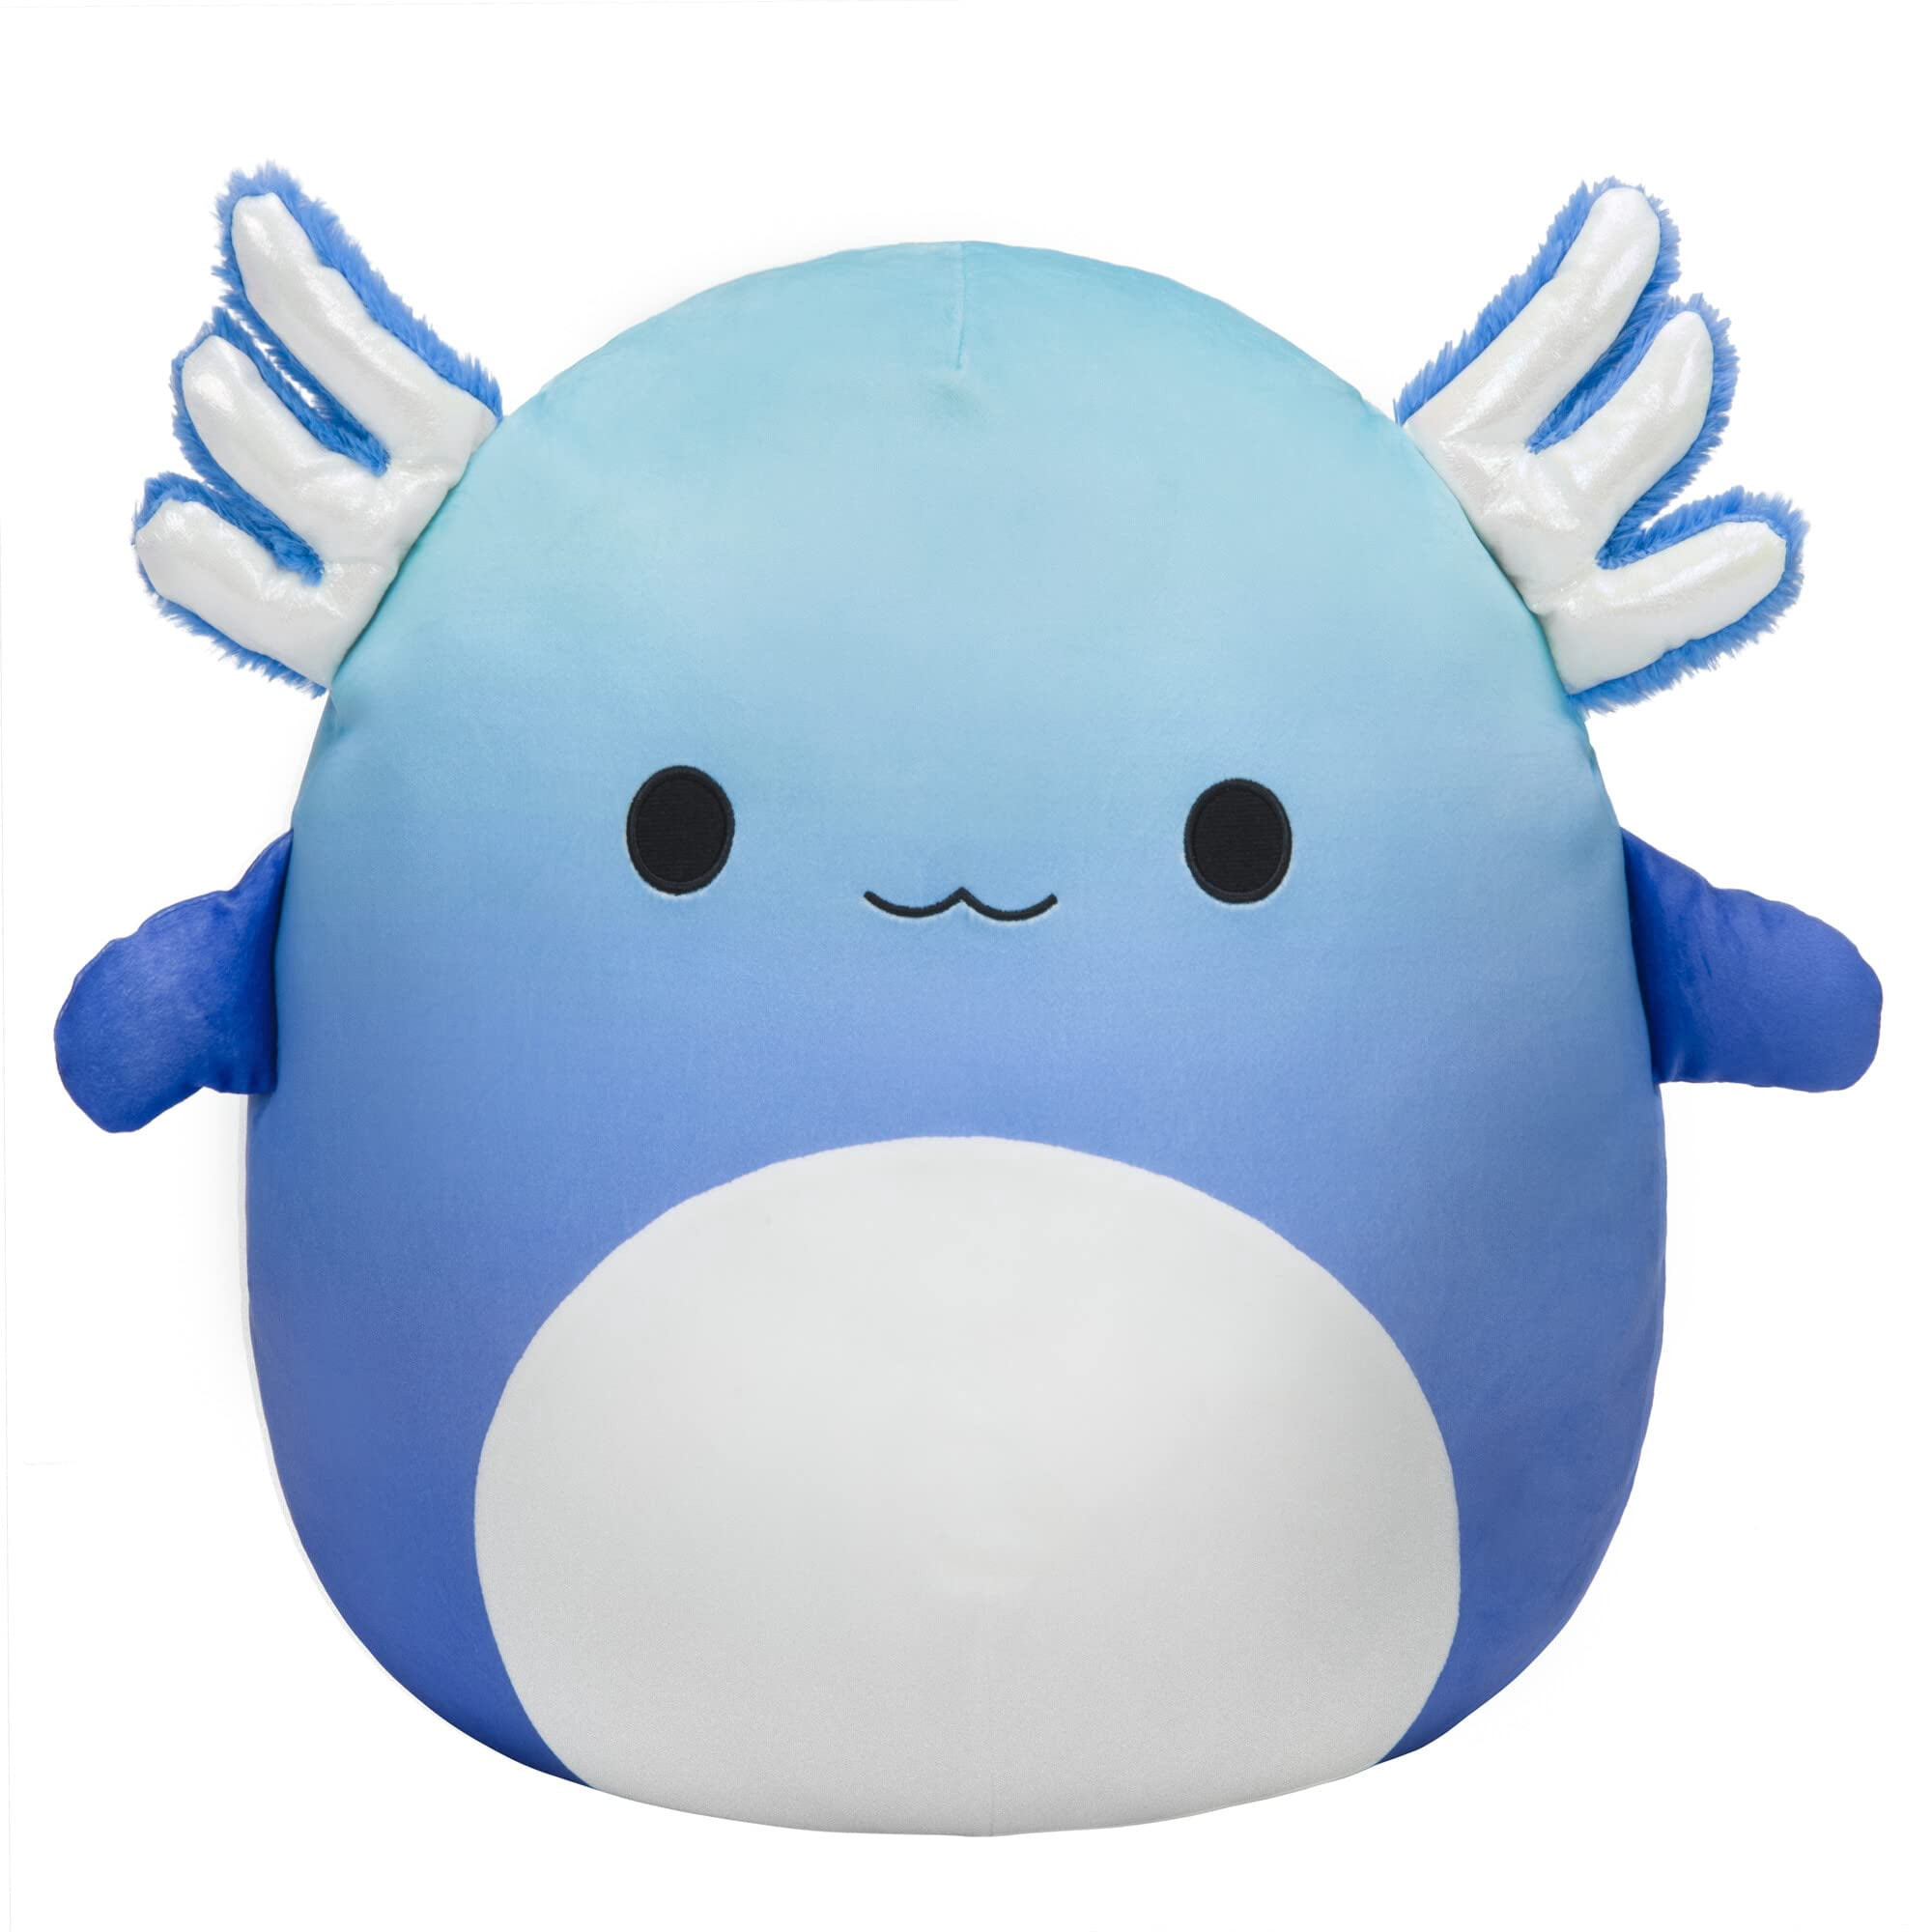 Squishmallows Archie the Axolotl 12 www.ugel01ep.gob.pe